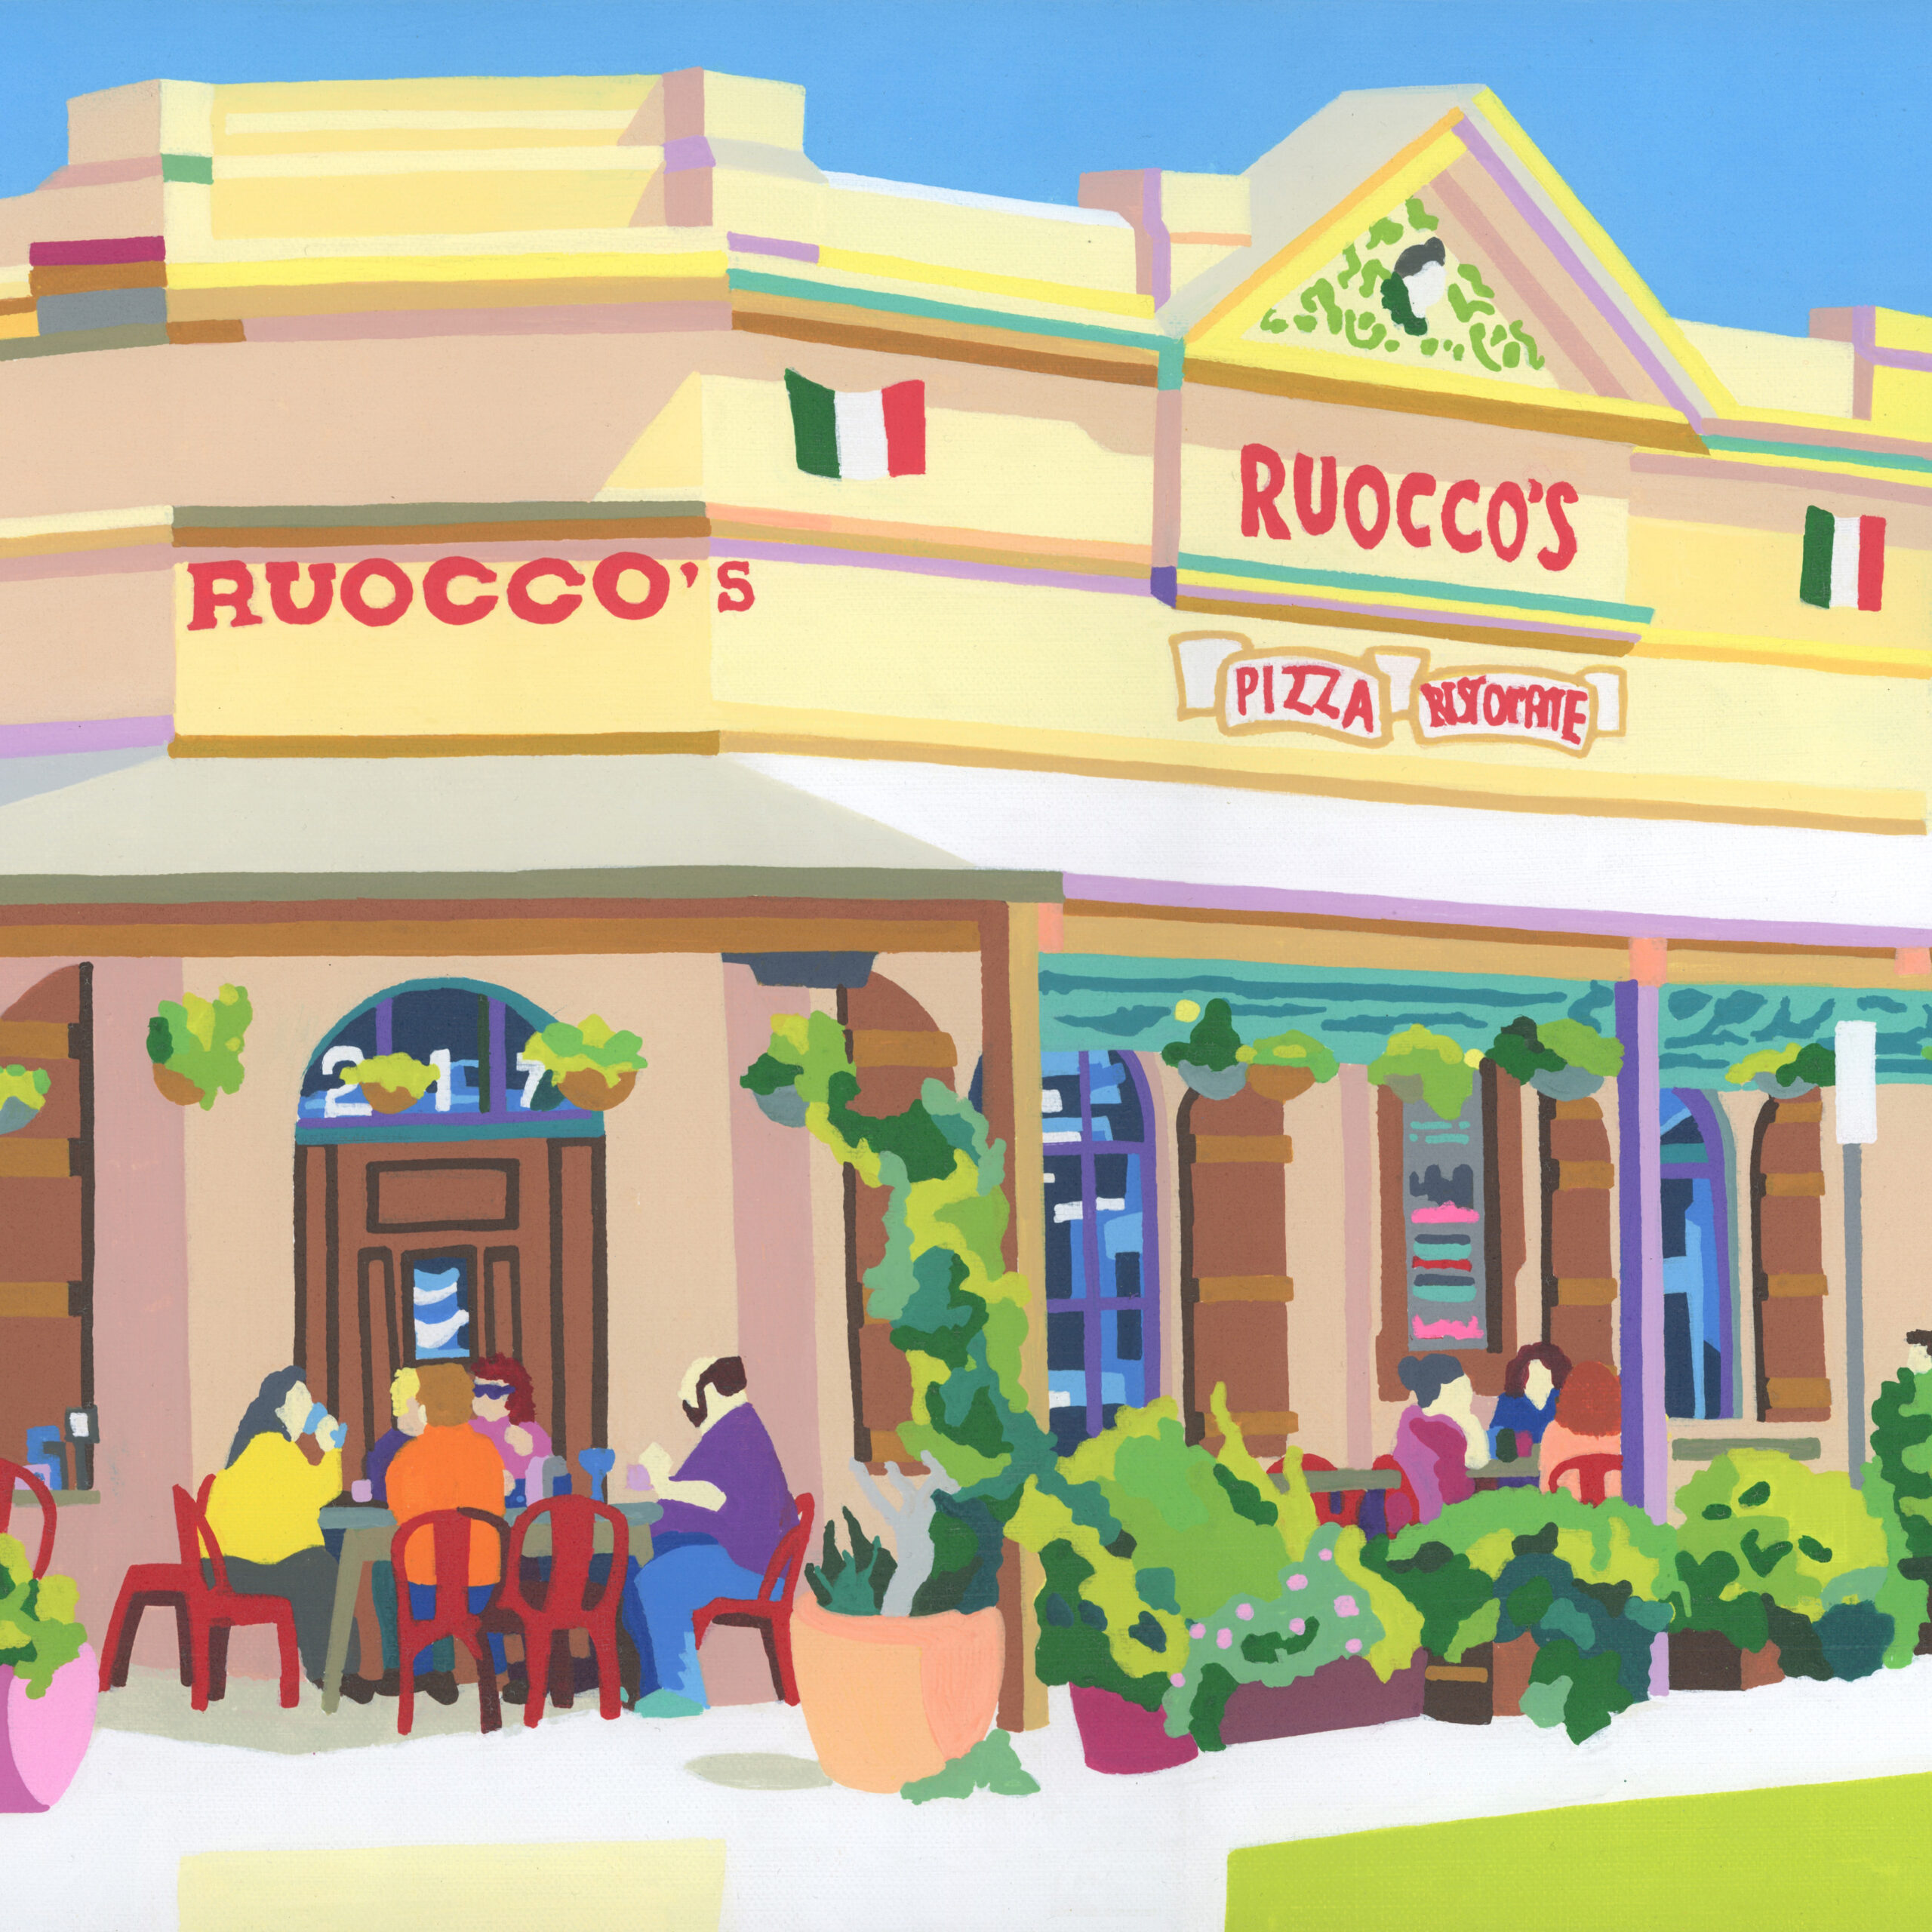 A detail of a painting by Toby Leek of Ruoccos Pizzeria Ristorante 355 x 710mm